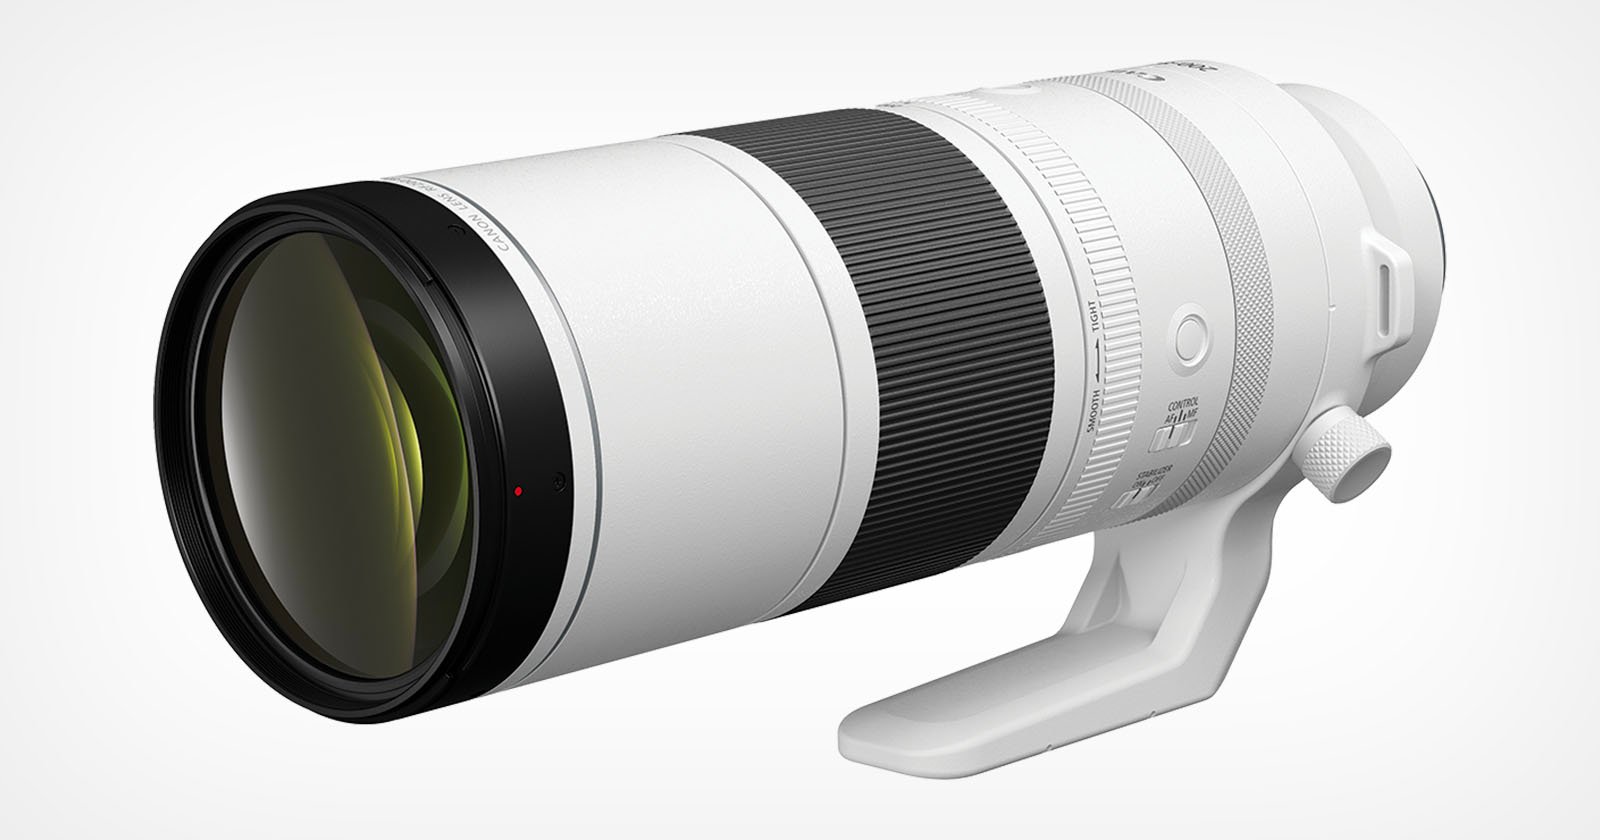 $1,900 Canon RF 200-800mm f/6.3-9 Lens Delivers Extreme Reach